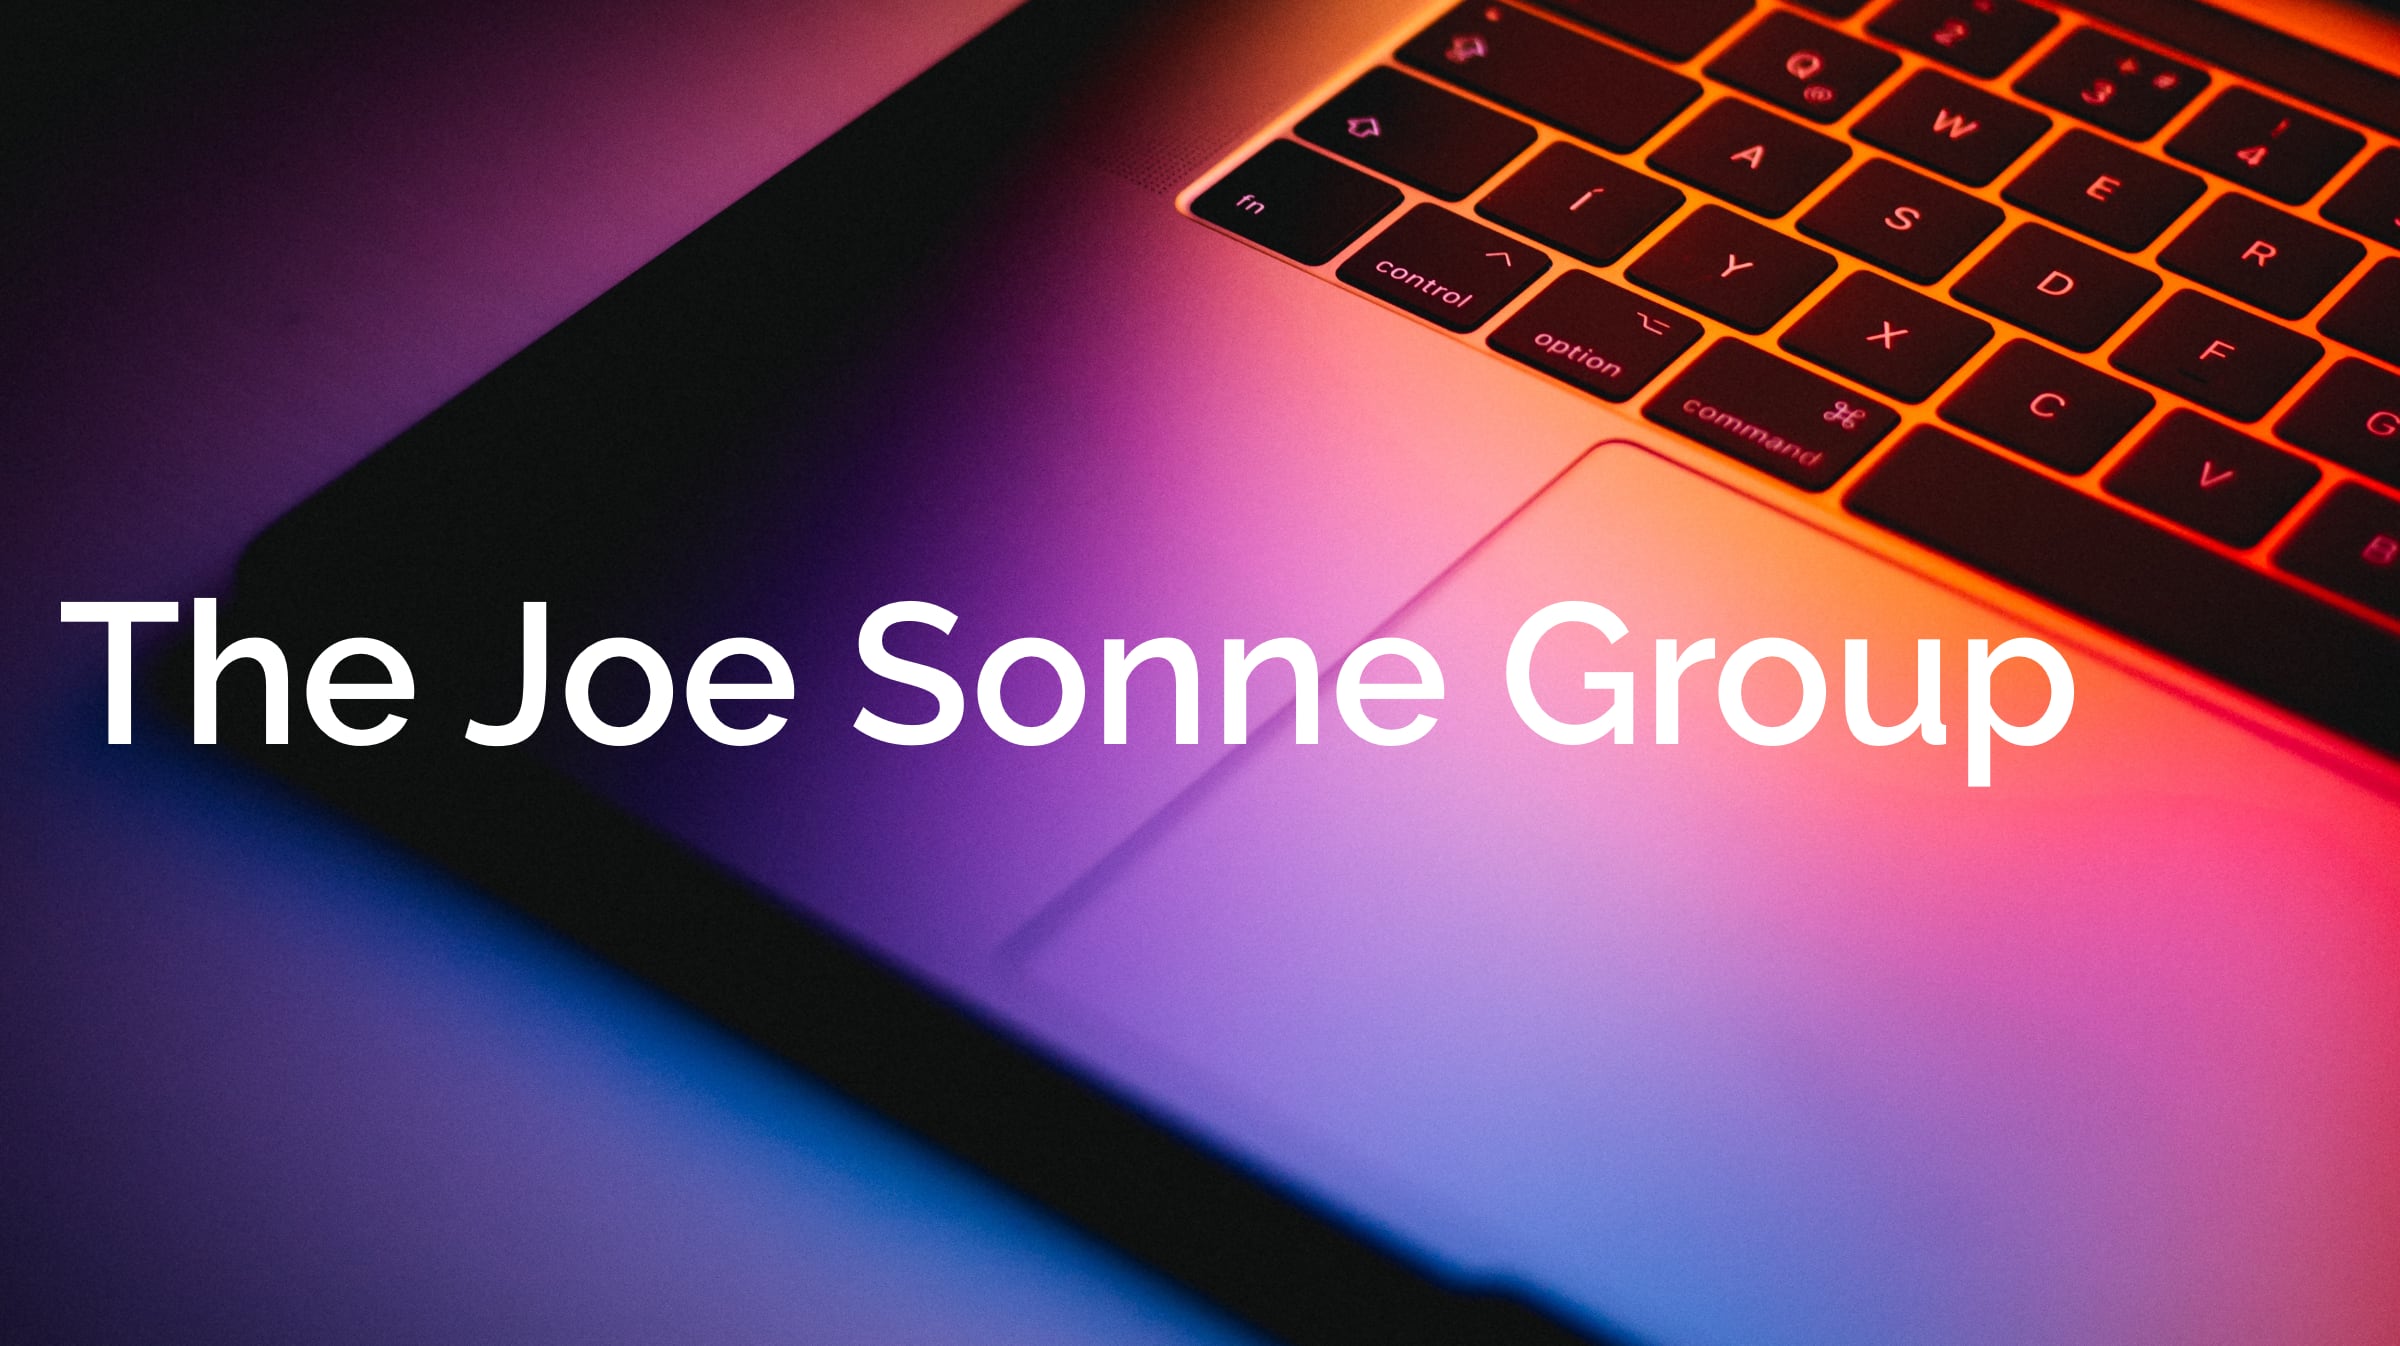 Decorative image of MacBook with The Joe Sonne Group title on it